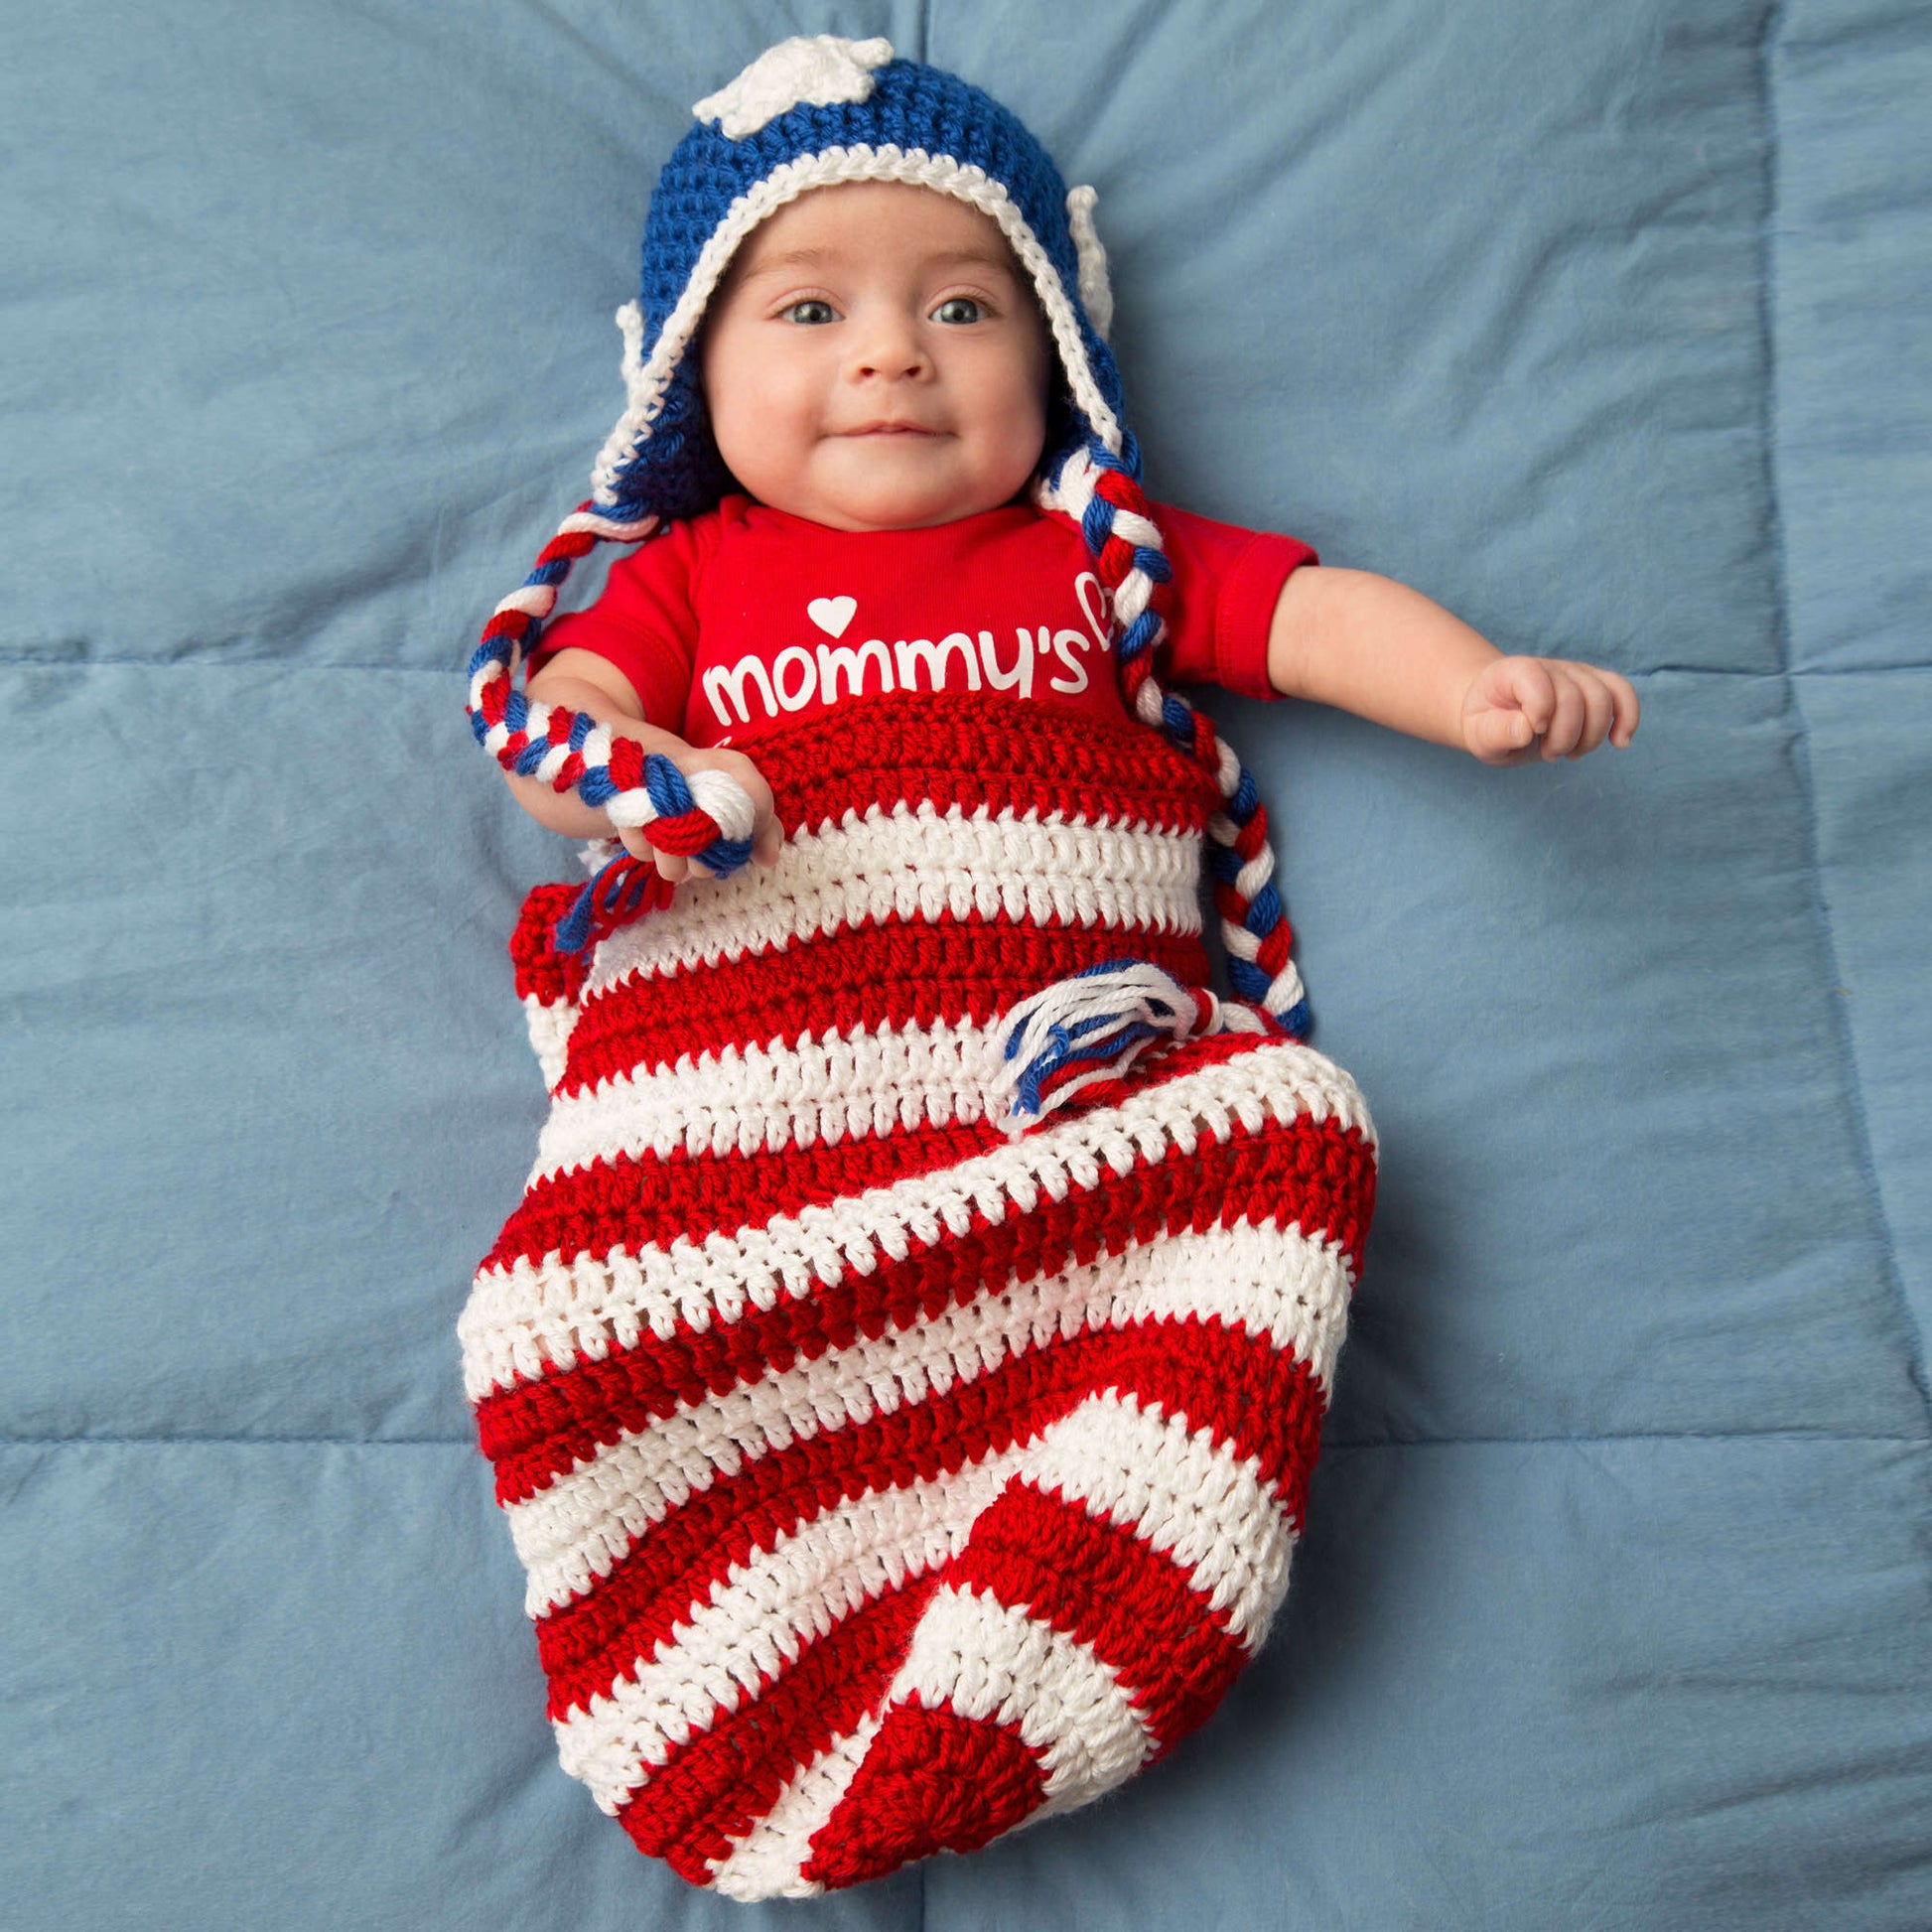 Red Heart Patriotic Baby Cocoon & Hat Red Heart Patriotic Baby Cocoon & Hat